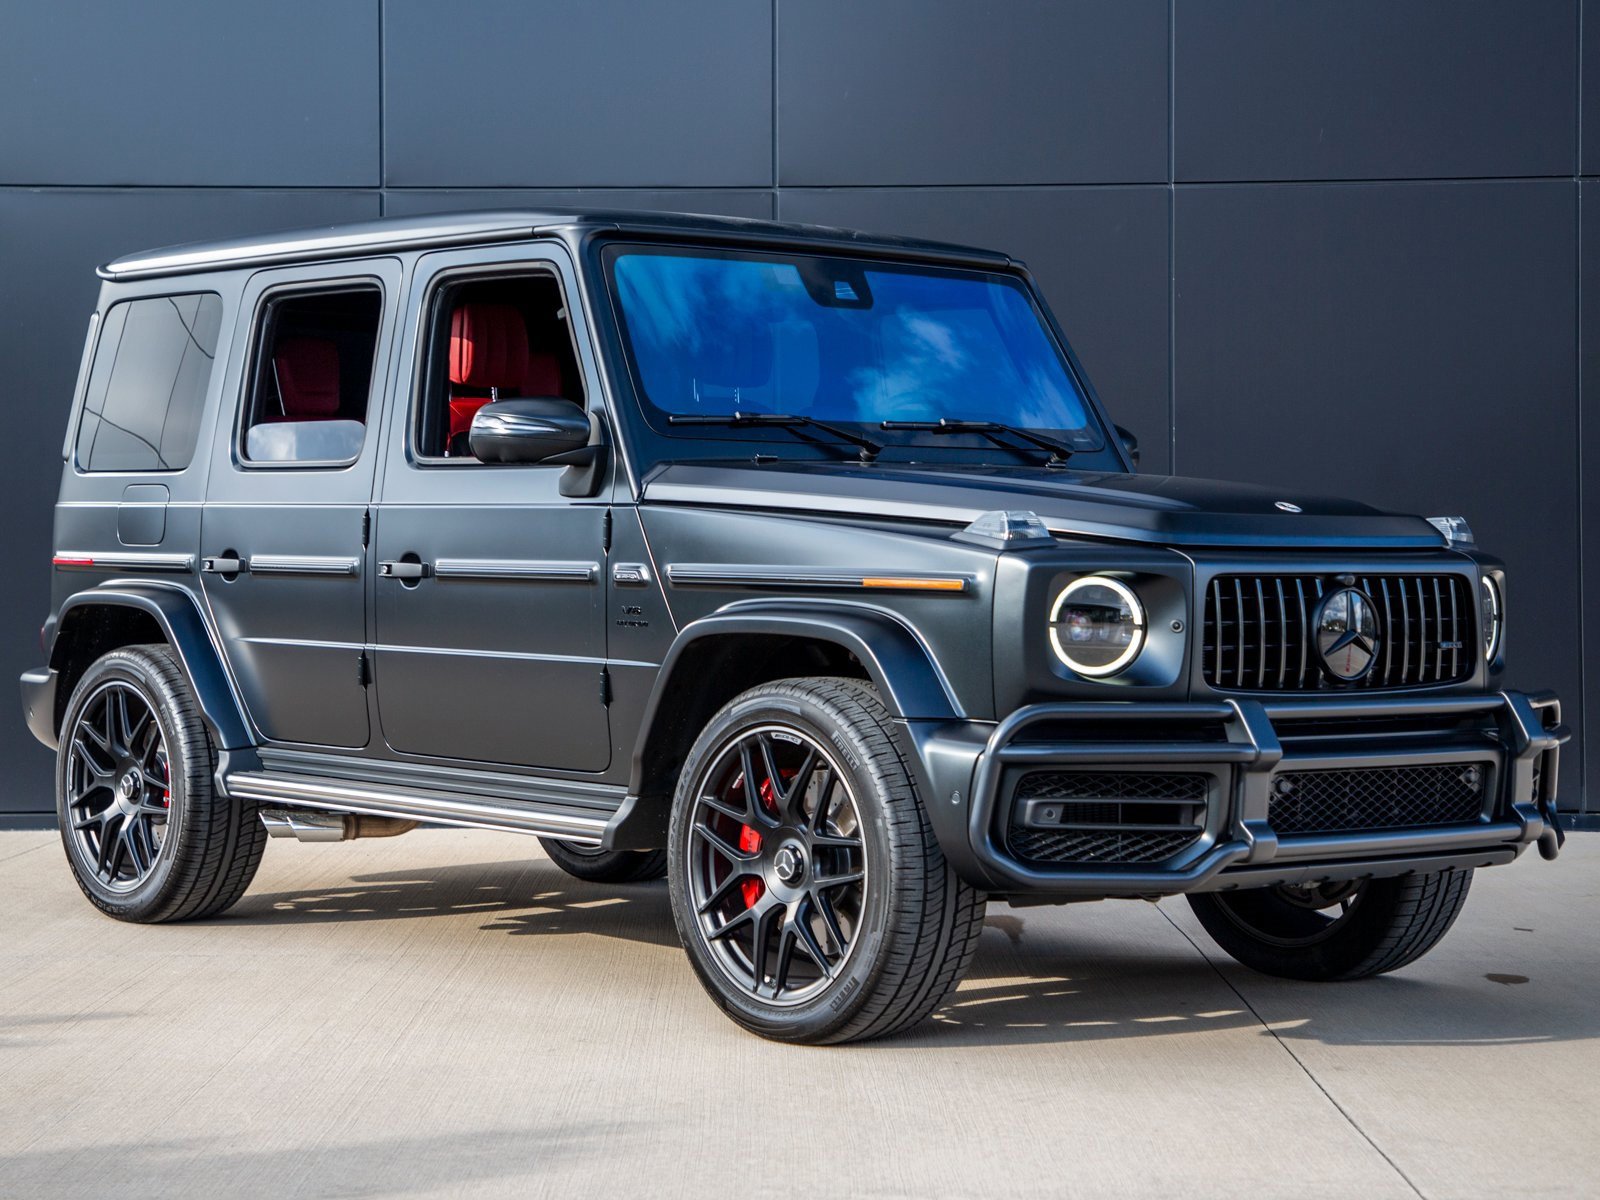 Used Mercedes Benz G Class Cars For Sale Right Now In Houston Tx Autotrader